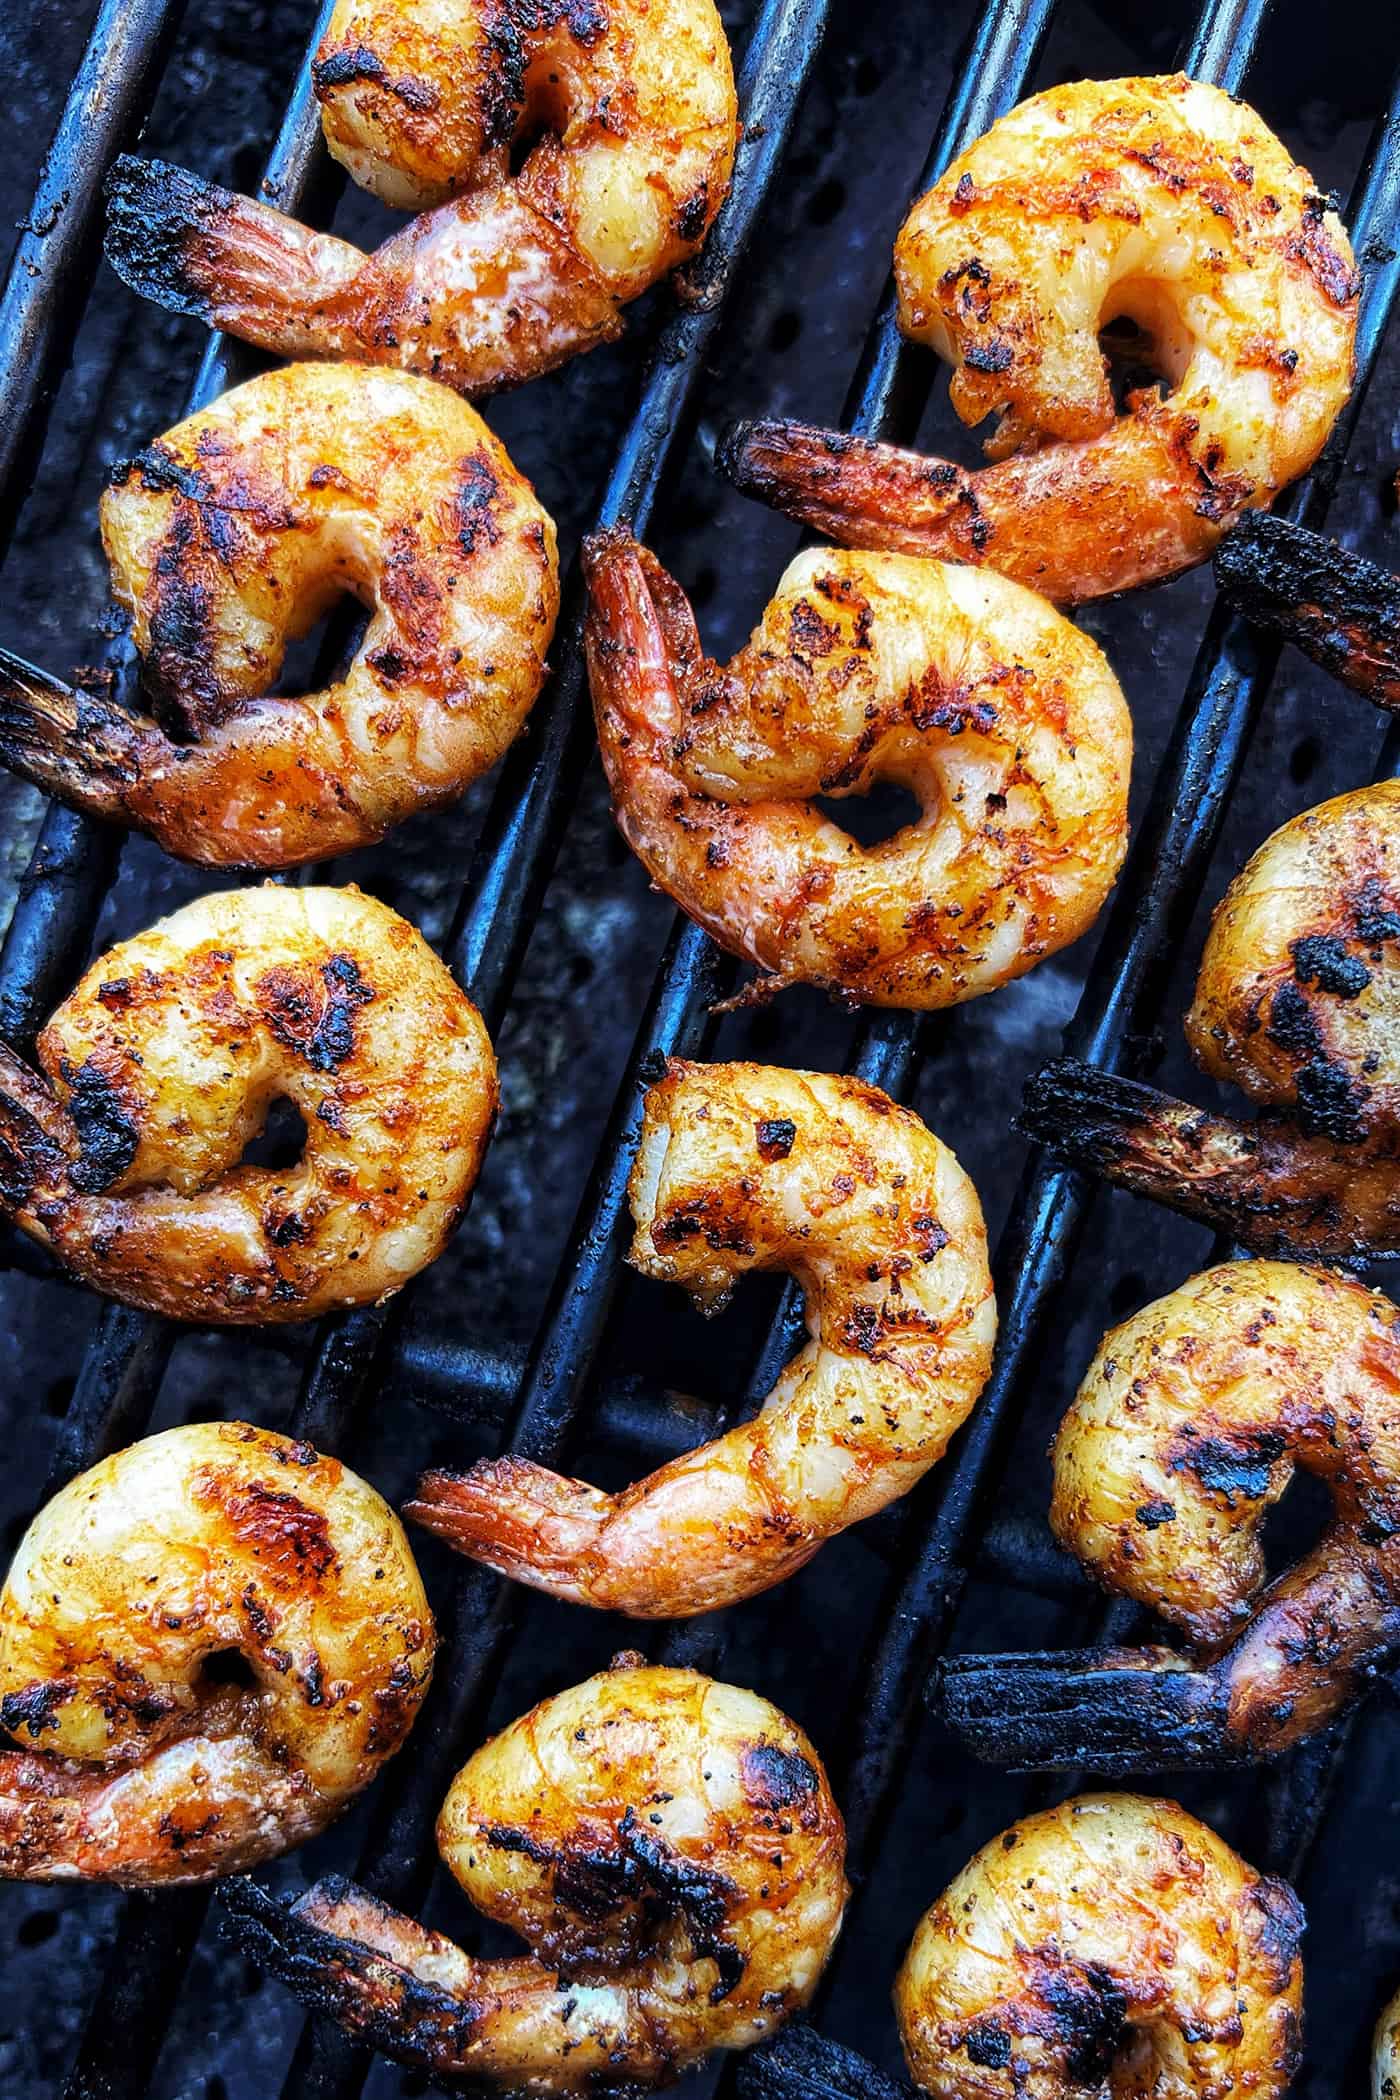 Overhead view of jumbo shrimp on a grill